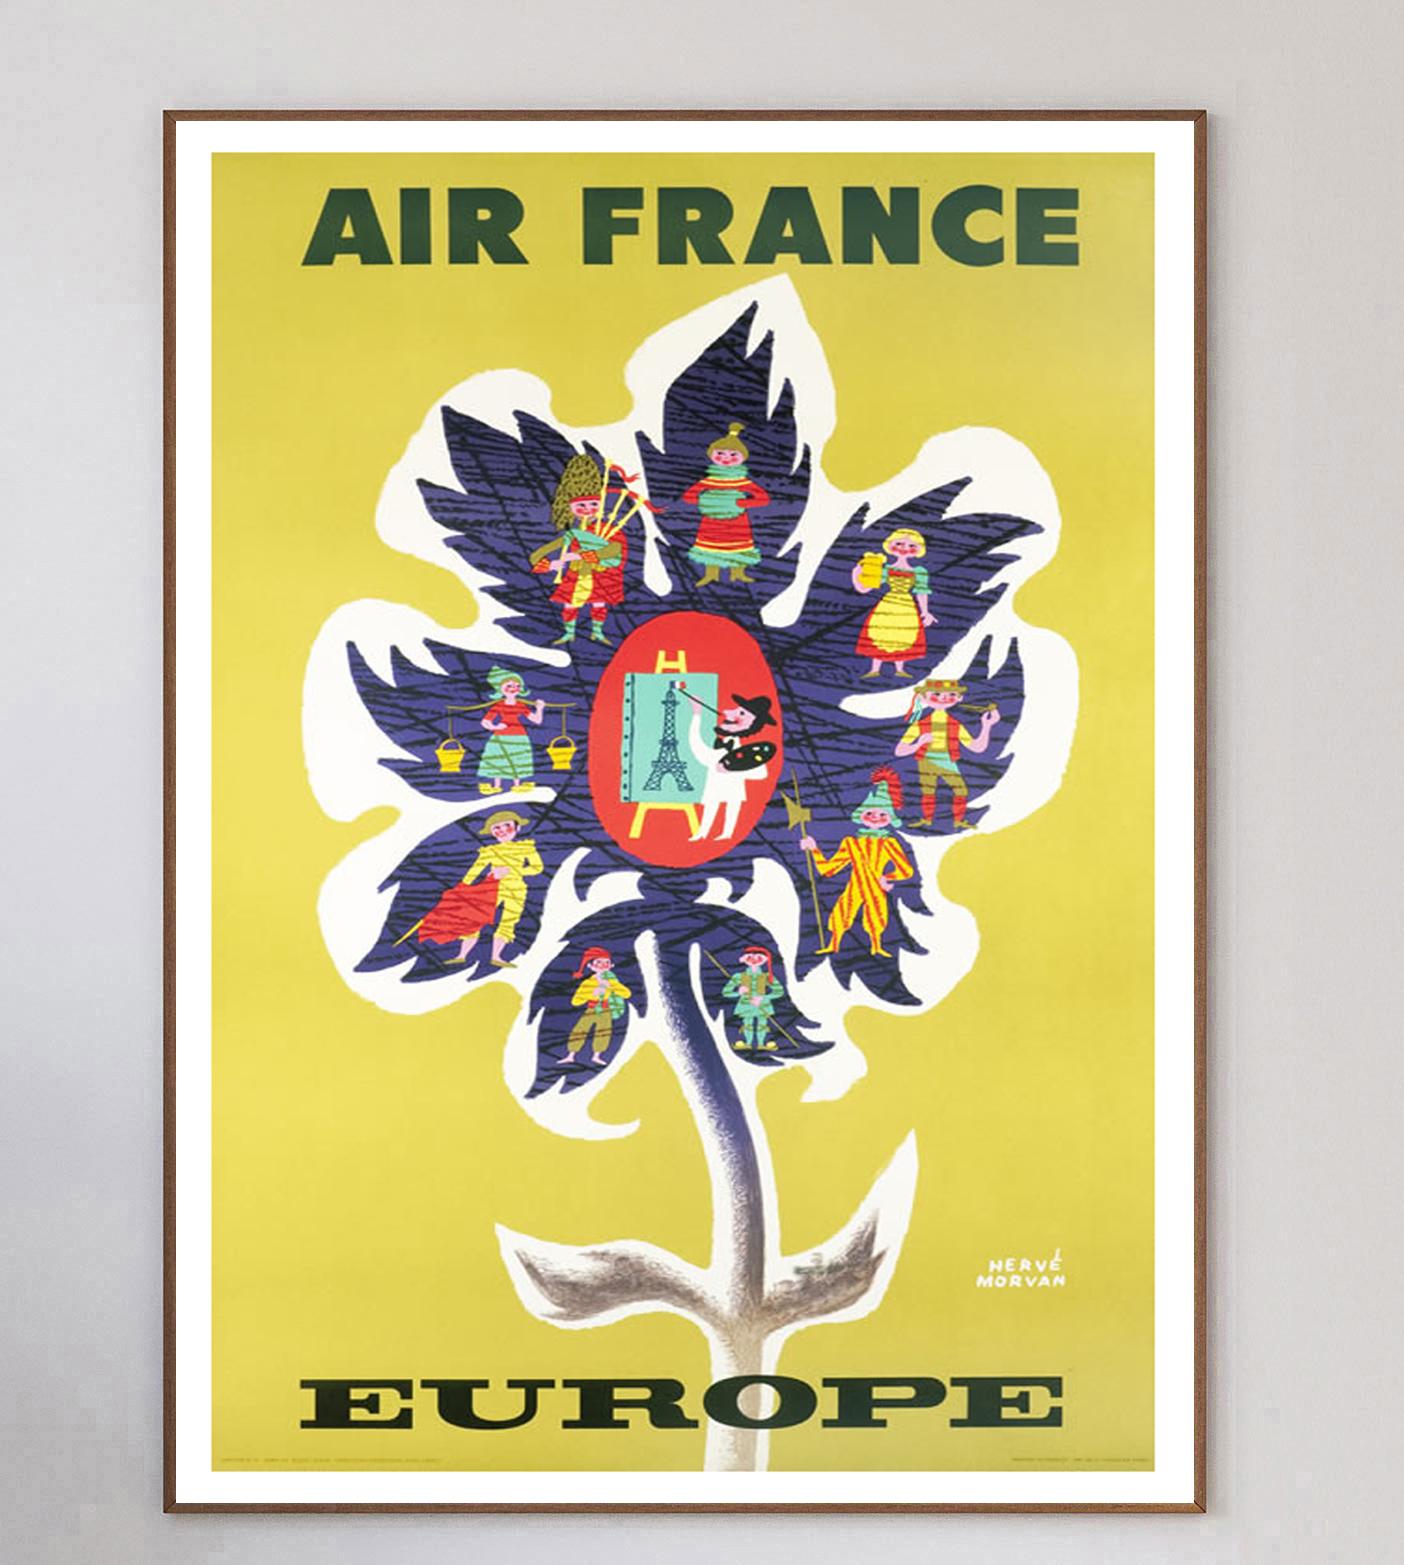 With fabulous artwork from French painter Herve Morvan, this poster promoting Air France routes to Europe was created in 1956. Air France was created in 1933 after a merger of multiple French airlines and continues to be one of the largest airlines